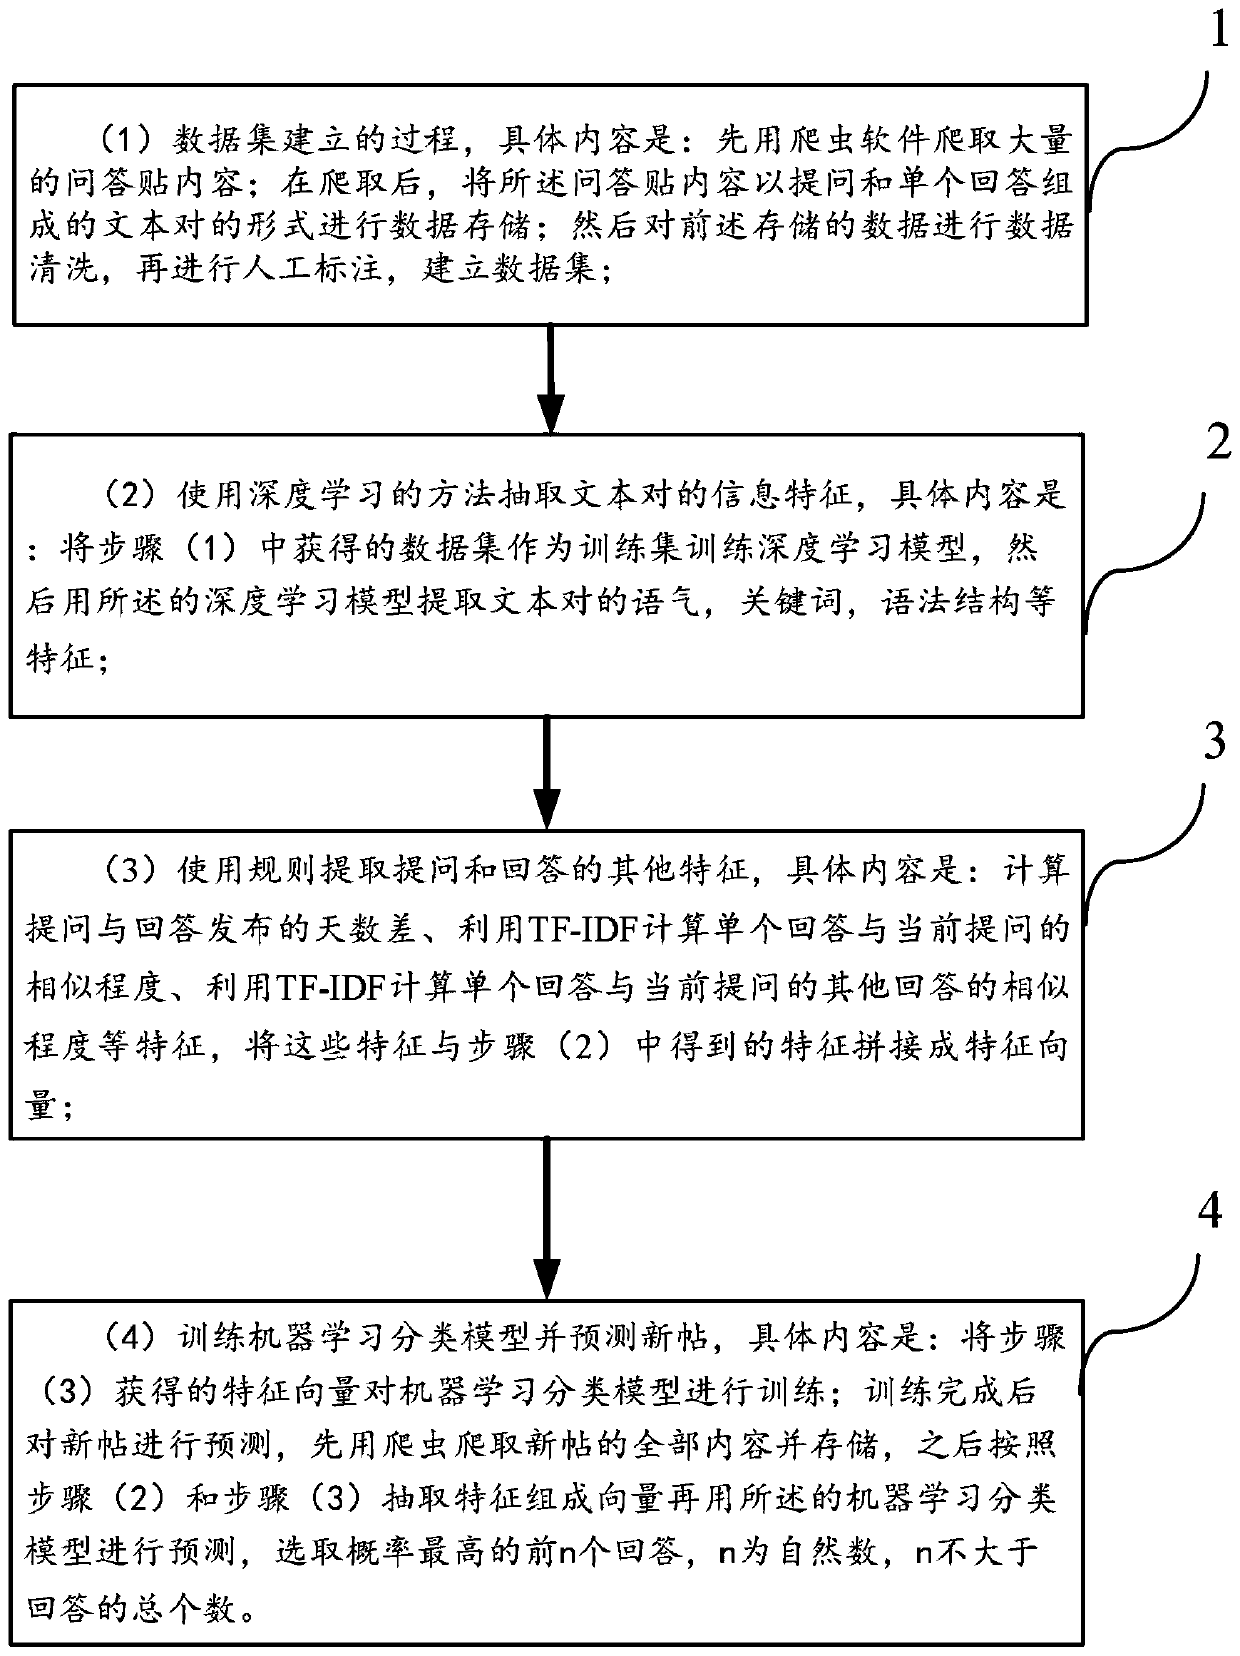 Method for automatically identifying correct answers in community question and answer forum based on artificial intelligence